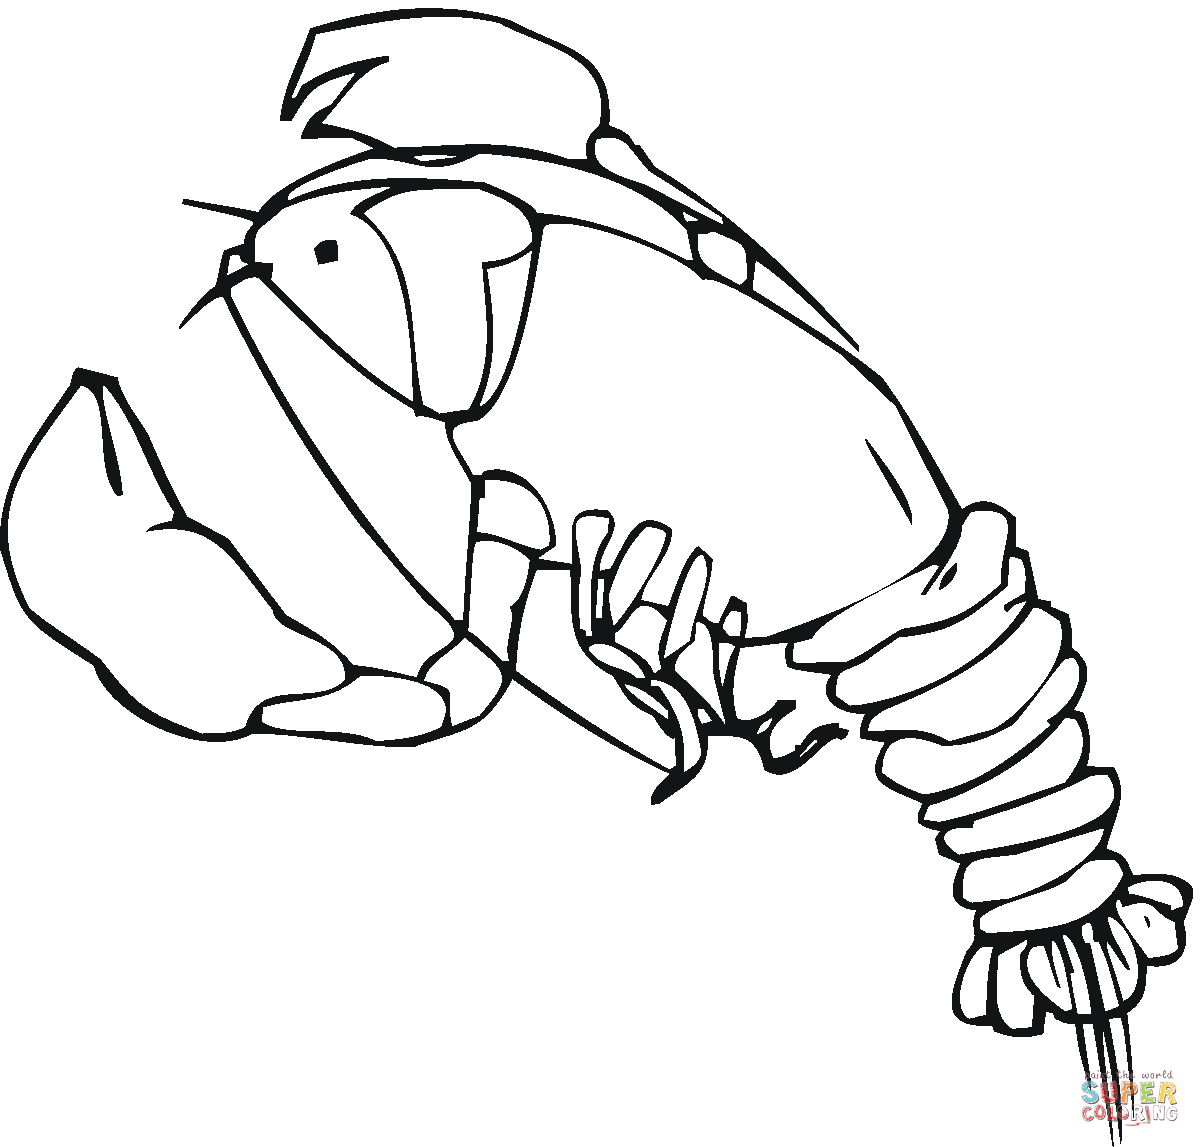 Printable Lobster Coloring Pages To Print